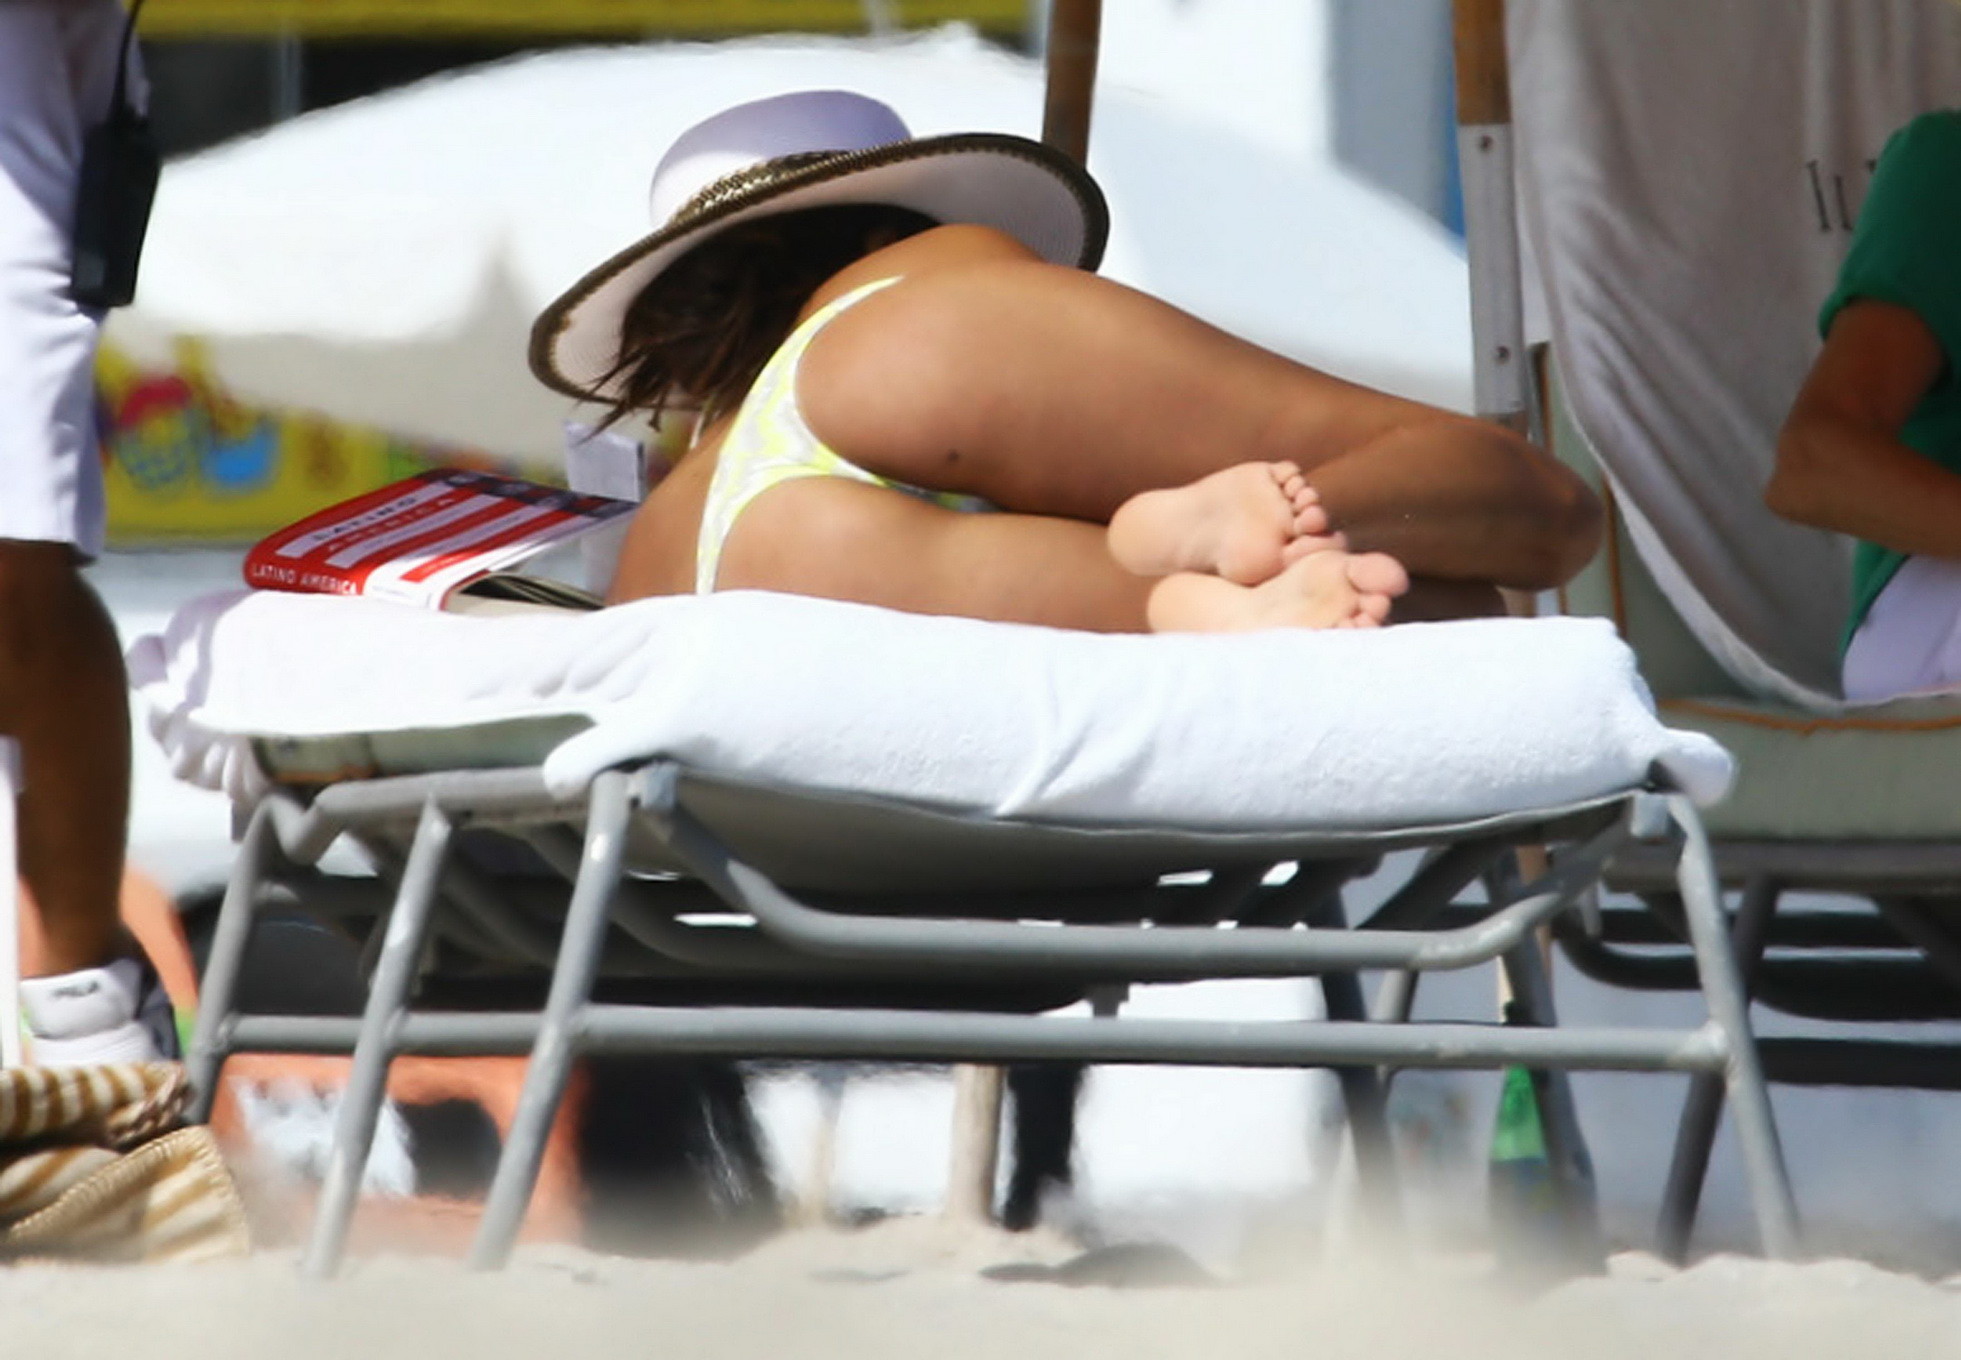 Eva Longoria shows her ass and cameltoe while tanning topless at the beach in Mi #75181456